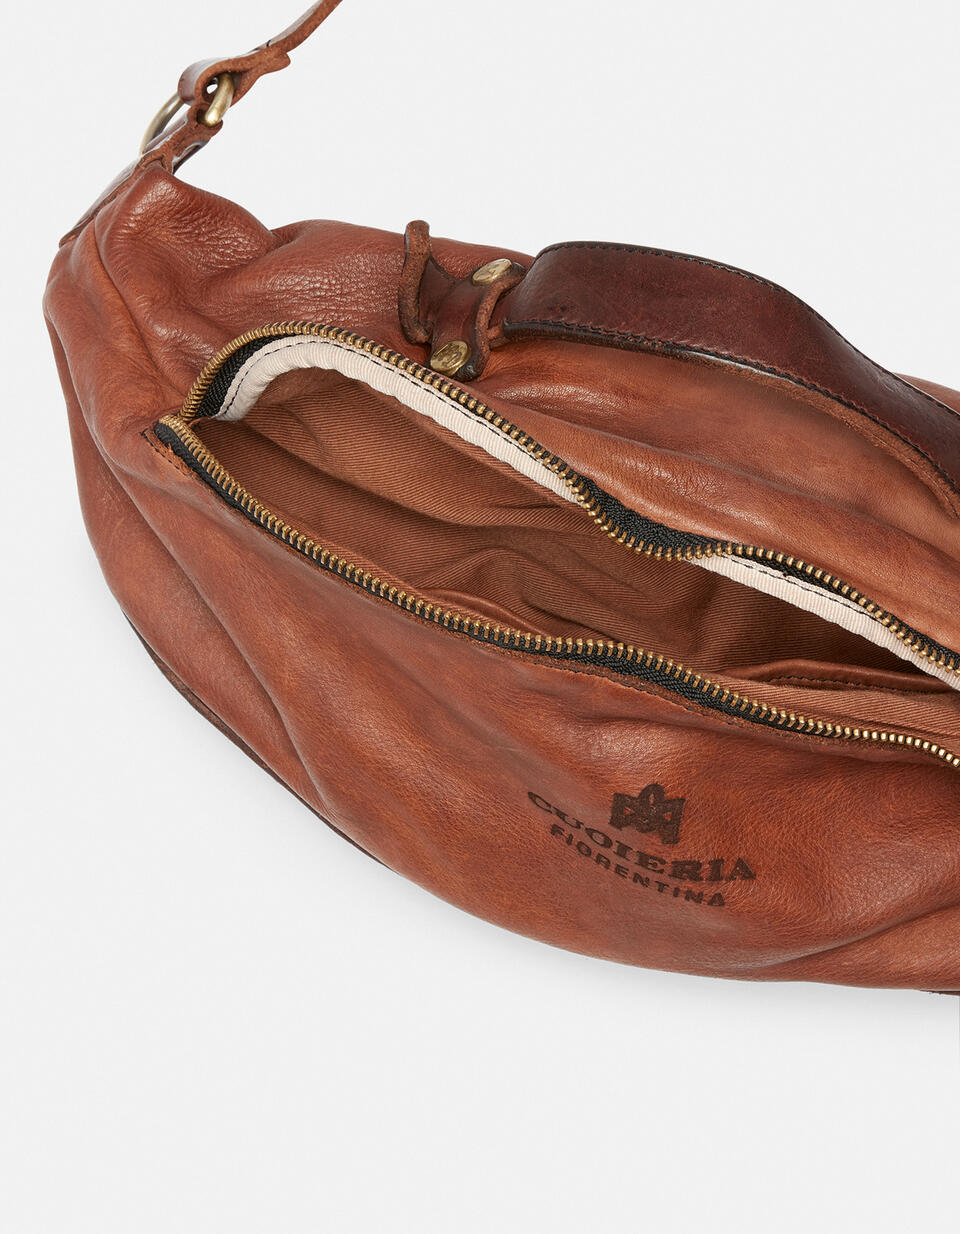 Millennial pouch in natural leather - Waist Bag - MEN'S BAGS | bags BRUCIATO - Waist Bag - MEN'S BAGS | bagsCuoieria Fiorentina